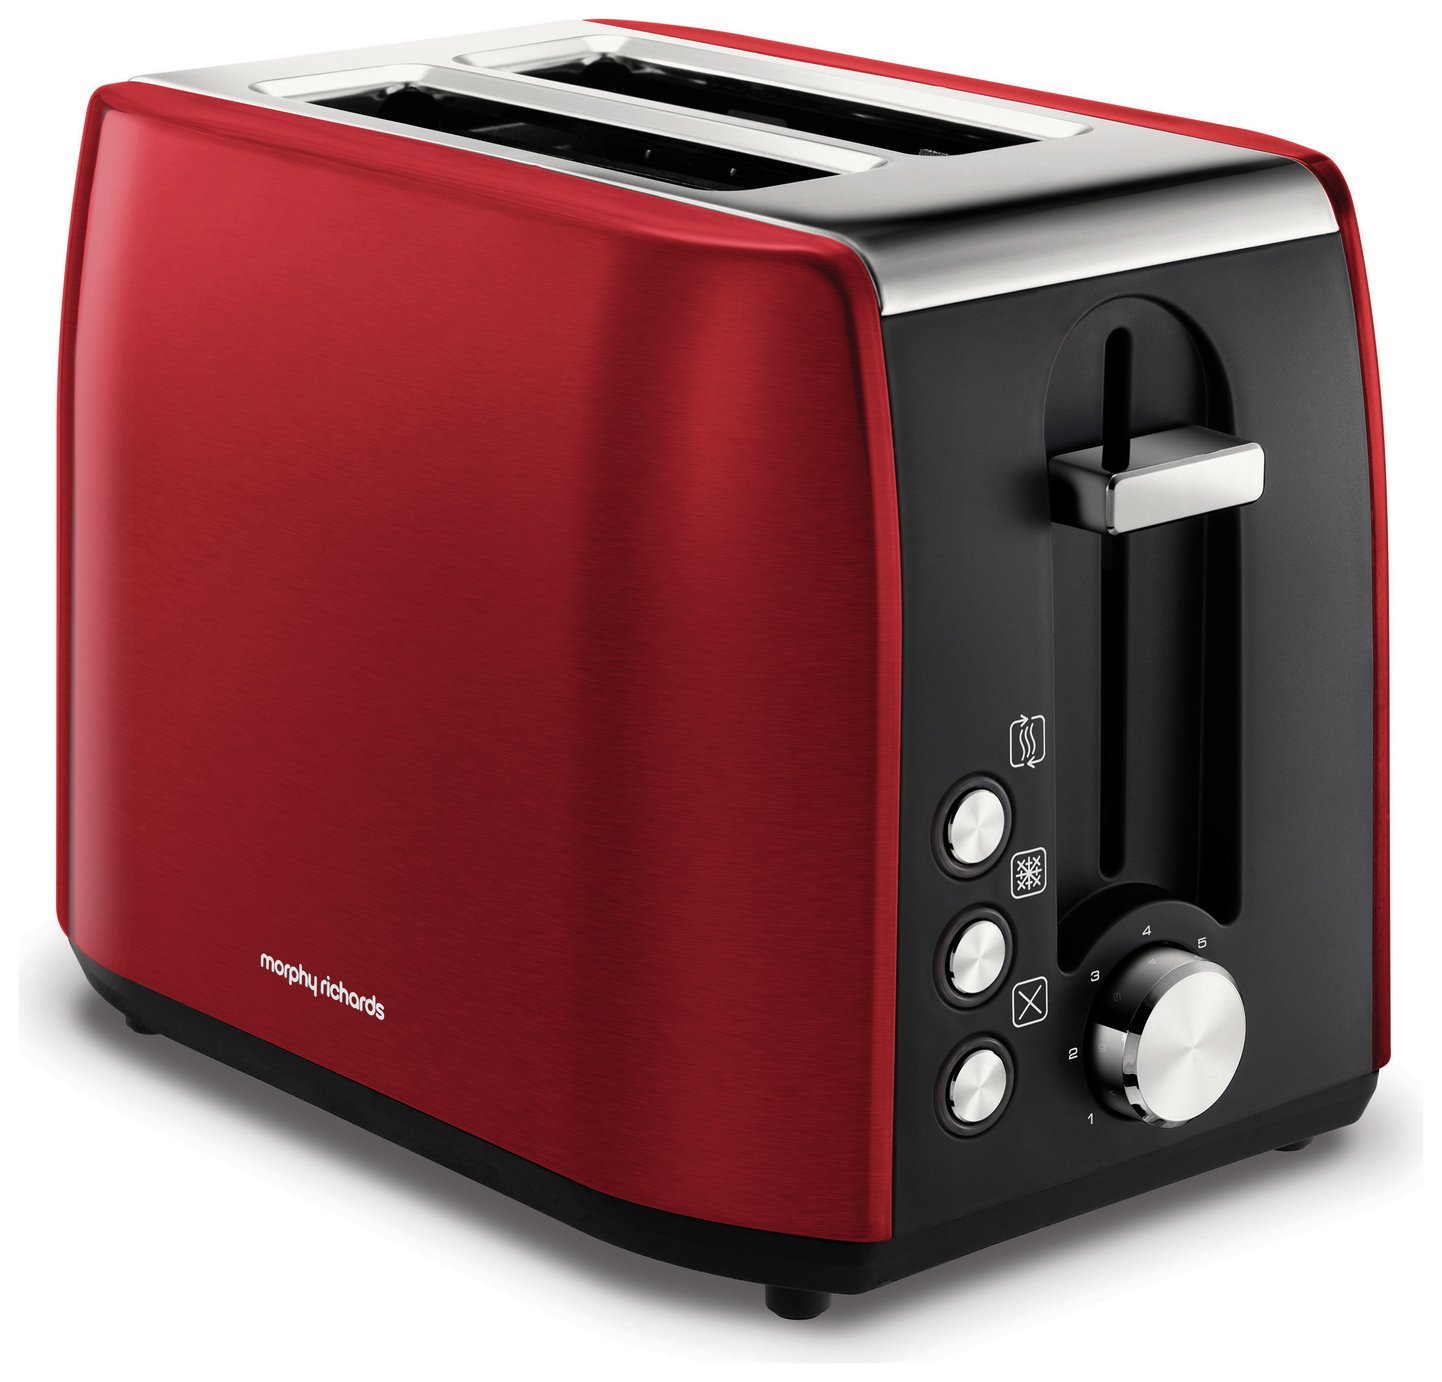 Morphy Richards 222060 Equip 2 Slice Toaster - Red